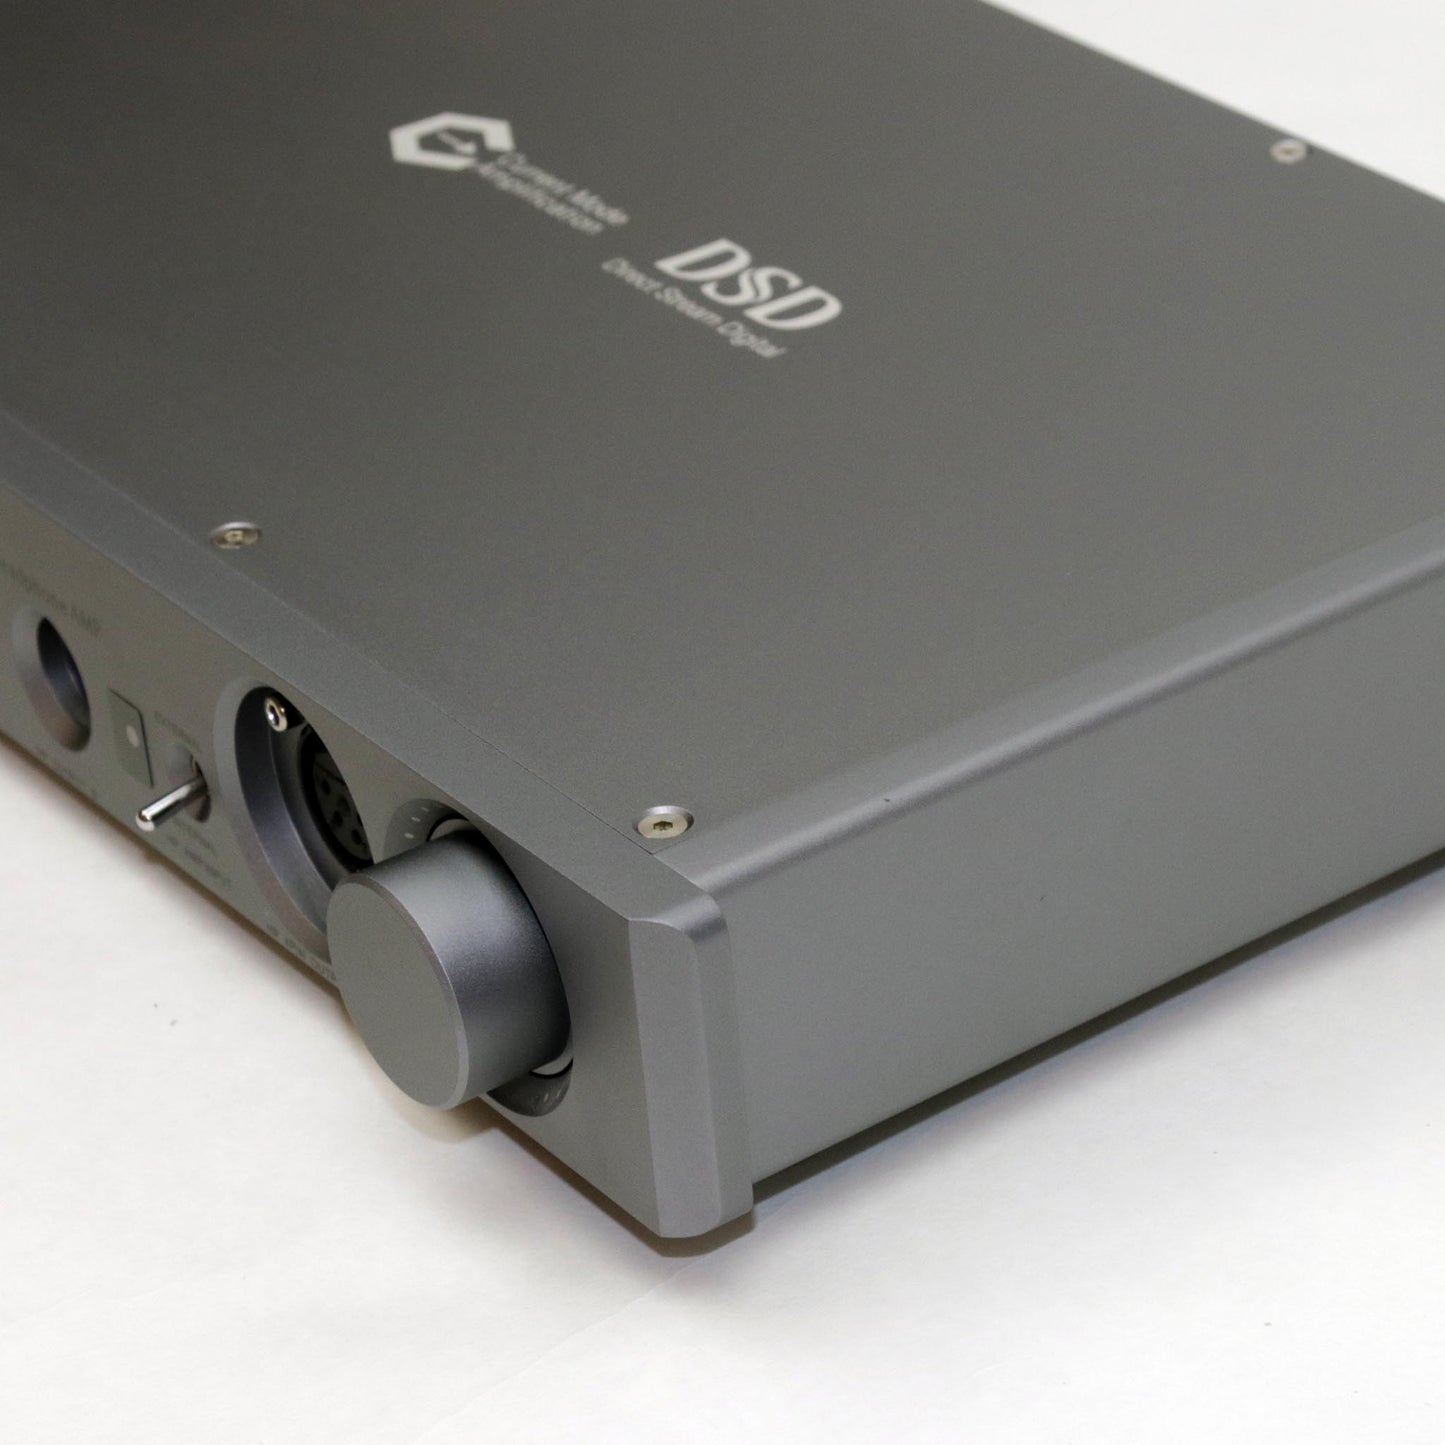 Questyle CMA600i Headphone Amplifier / DAC (USED)